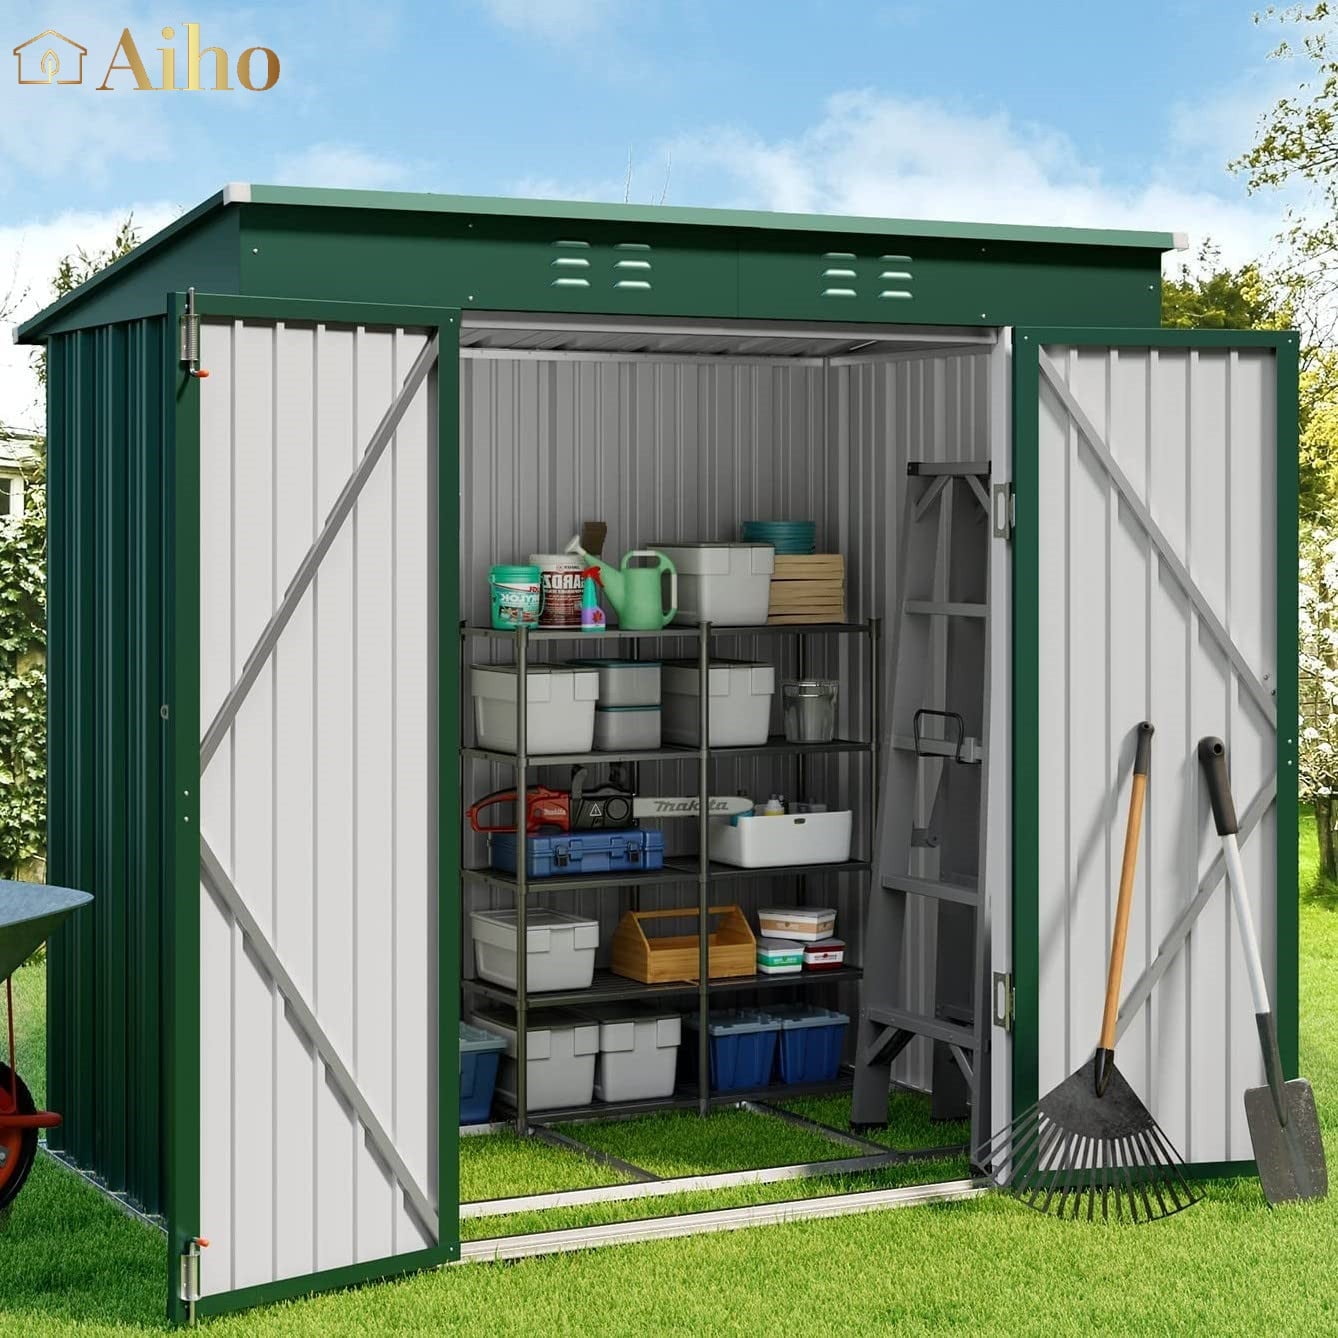 Aiho 6'x 4' Outdoor Storage Shed with Lockable Door for Garden Backyard Patio - Green - image 1 of 11